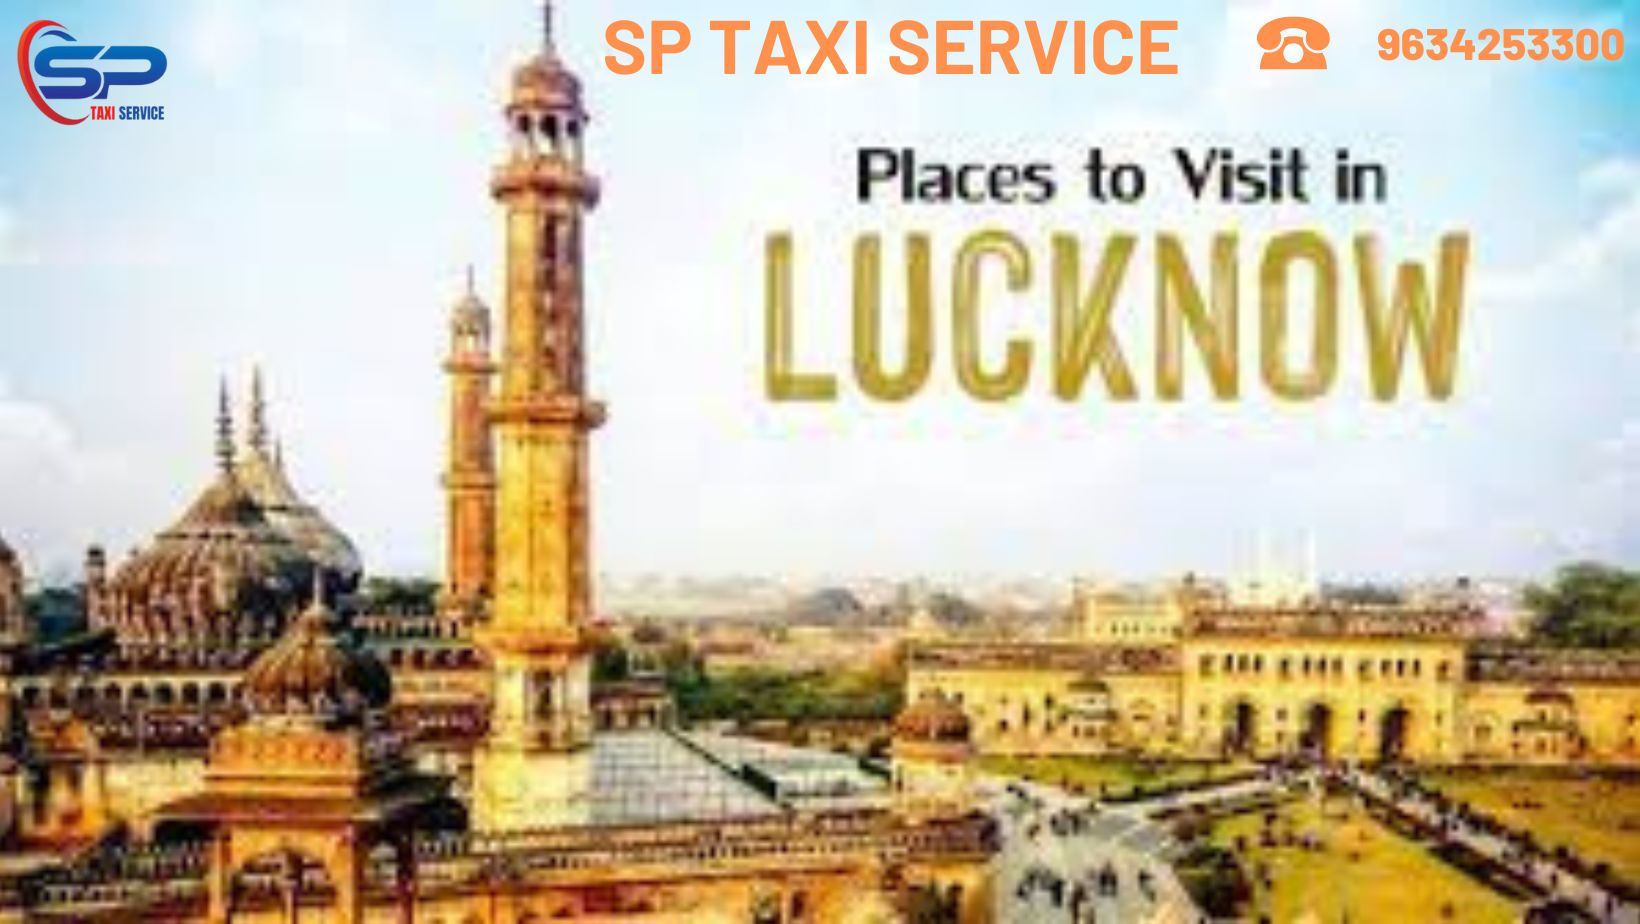 Lucknow Taxi service